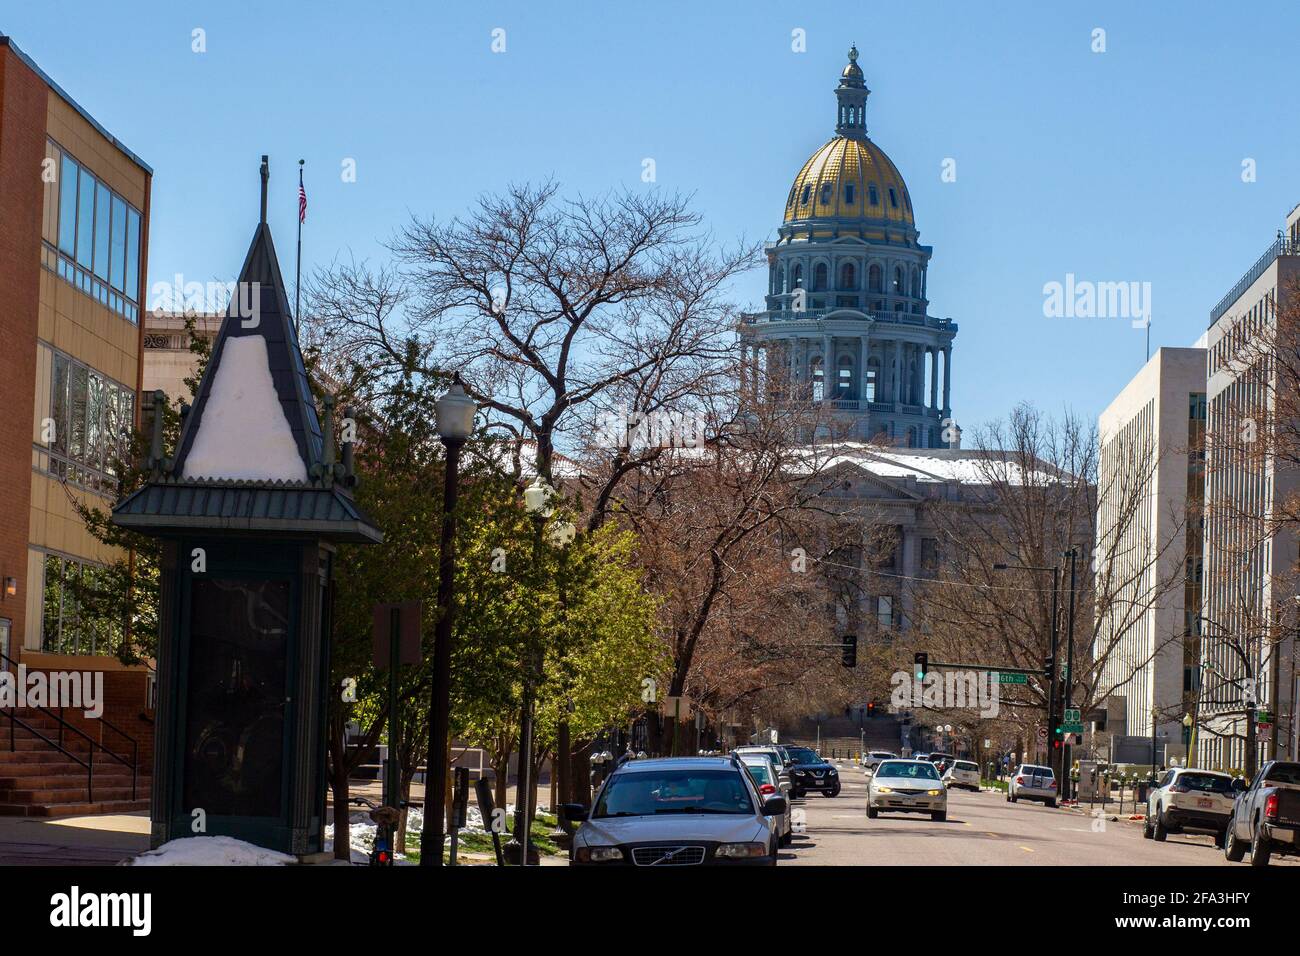 Colorado State Capitol Building, located at 200 East Colfax Avenue in Denver, Colorado, United States. Stock Photo